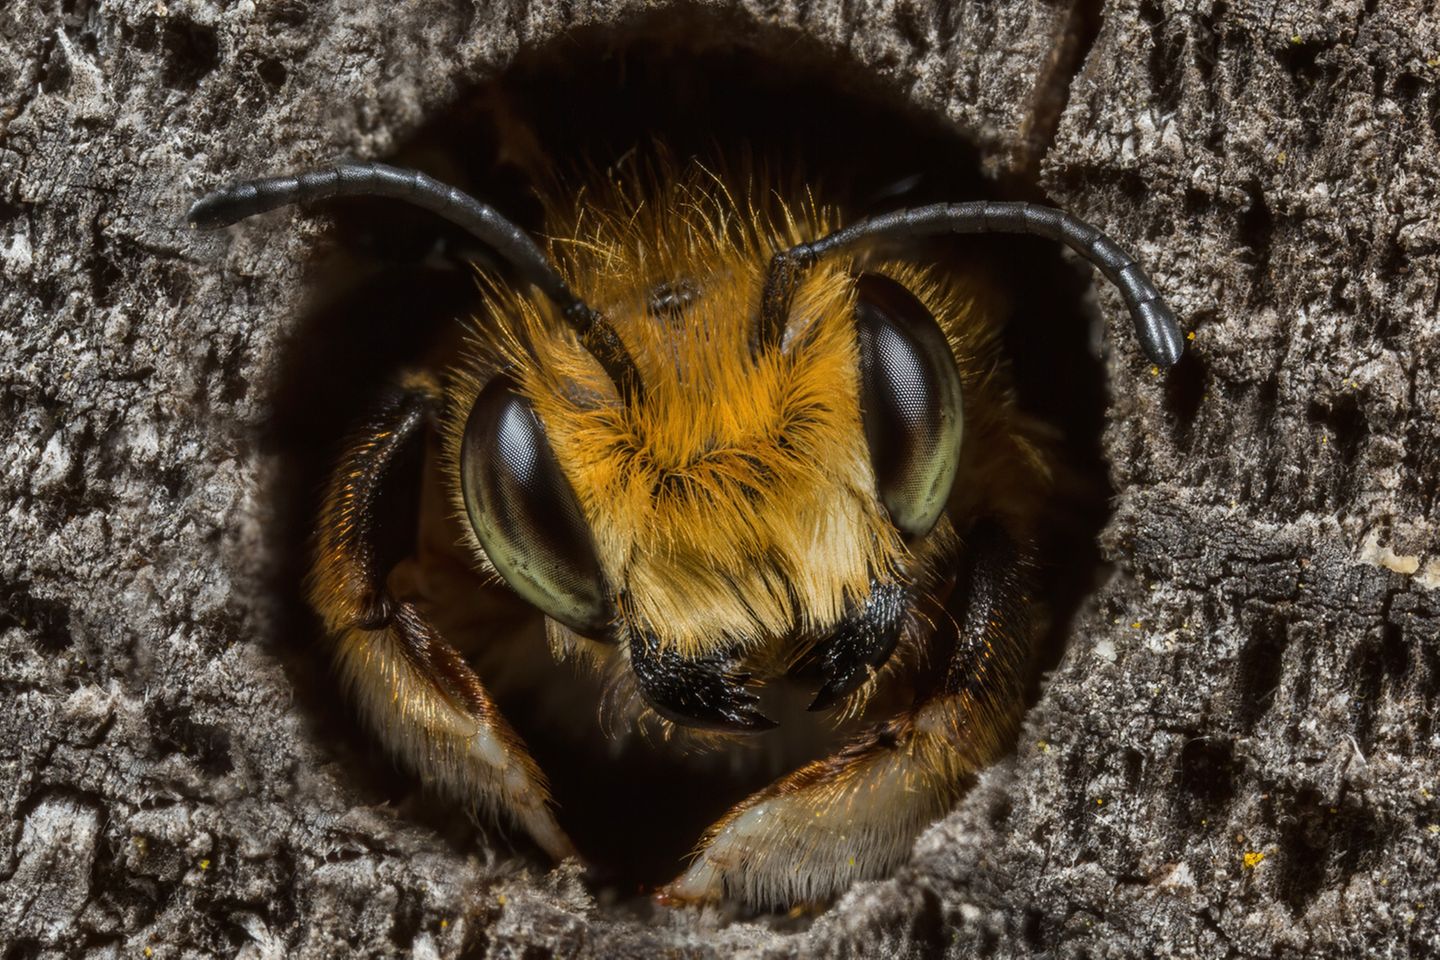 Willughby’s Leafcutter Bee Animal Portraits | Runner-up Ed Phillips Willughby’s leafcutter bee (Megachile willughbiella) Staffordshire, England  Canon 5D Mark III with Canon 65mm f/2.8 Macro lens. 65mm; 1/200th second; f/13; ISO 200.  I have a particular interest in the UK’s solitary bees and like to photograph the species that visit our Staffordshire garden. I had seen this male Willughby’s leafcutter bee looking out of a hole, but it kept retreating whenever I approached. They often pause to warm-up at the entrance before flying off, so I waited, camera poised for the right moment. It eventually reappeared and I carefully framed the shot. At the last moment it cocked its head to one side to what I felt was a pleasing angle.